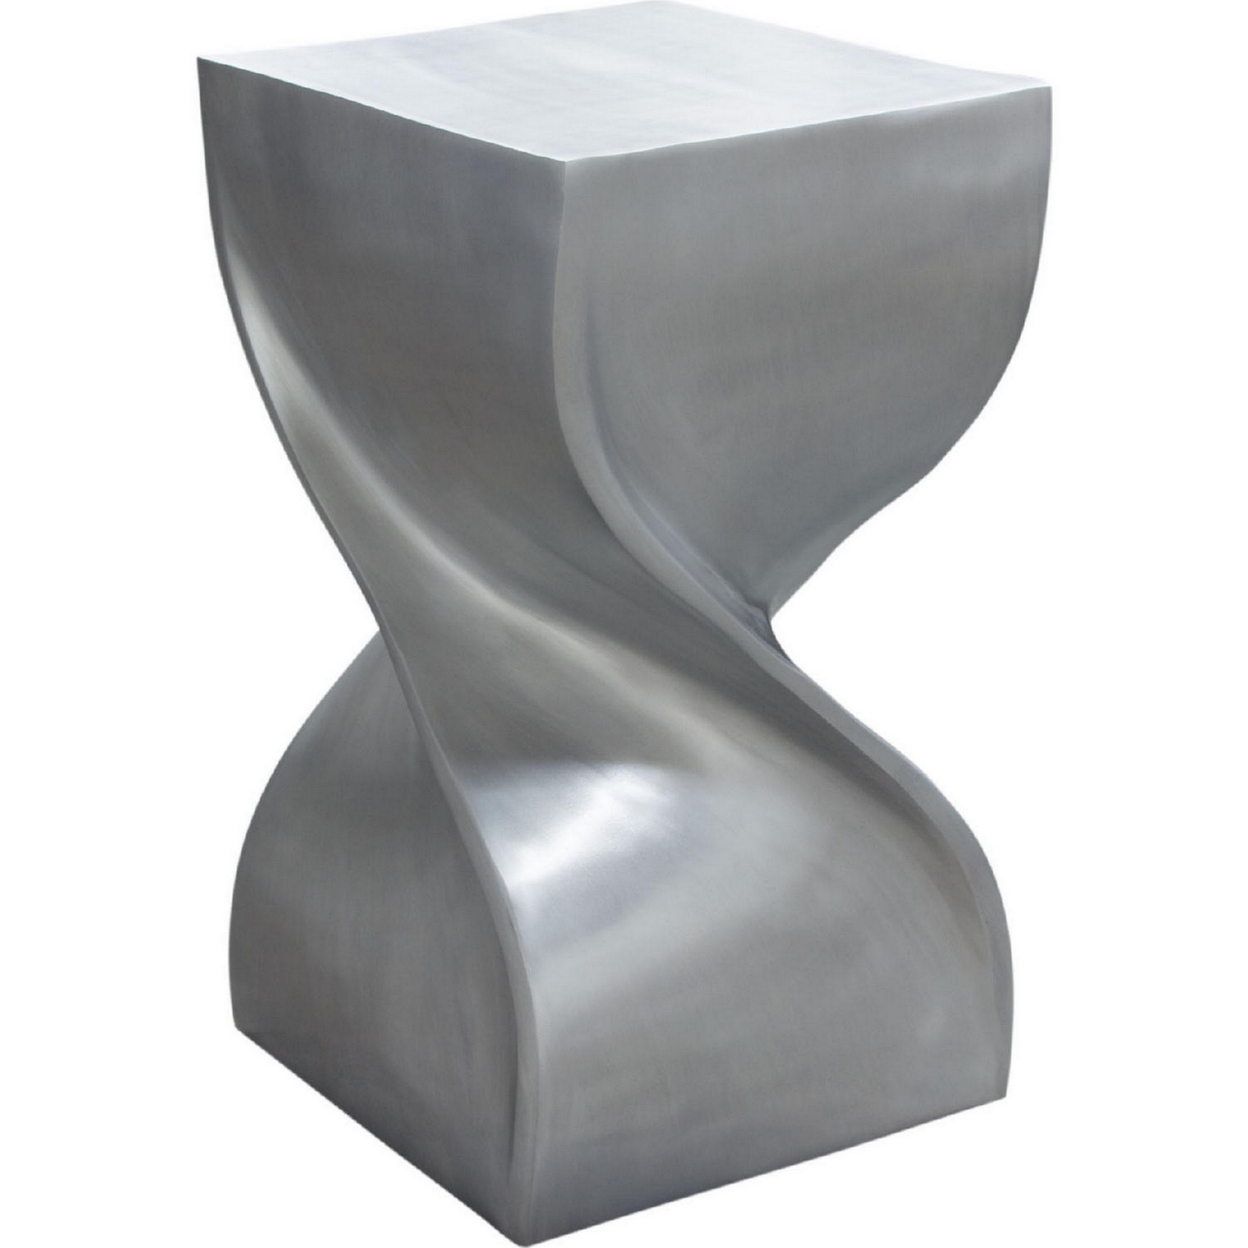 12 Inch Modern Square Accent Table, Hourglass Spiral Shape, Antique Silver- Saltoro Sherpi